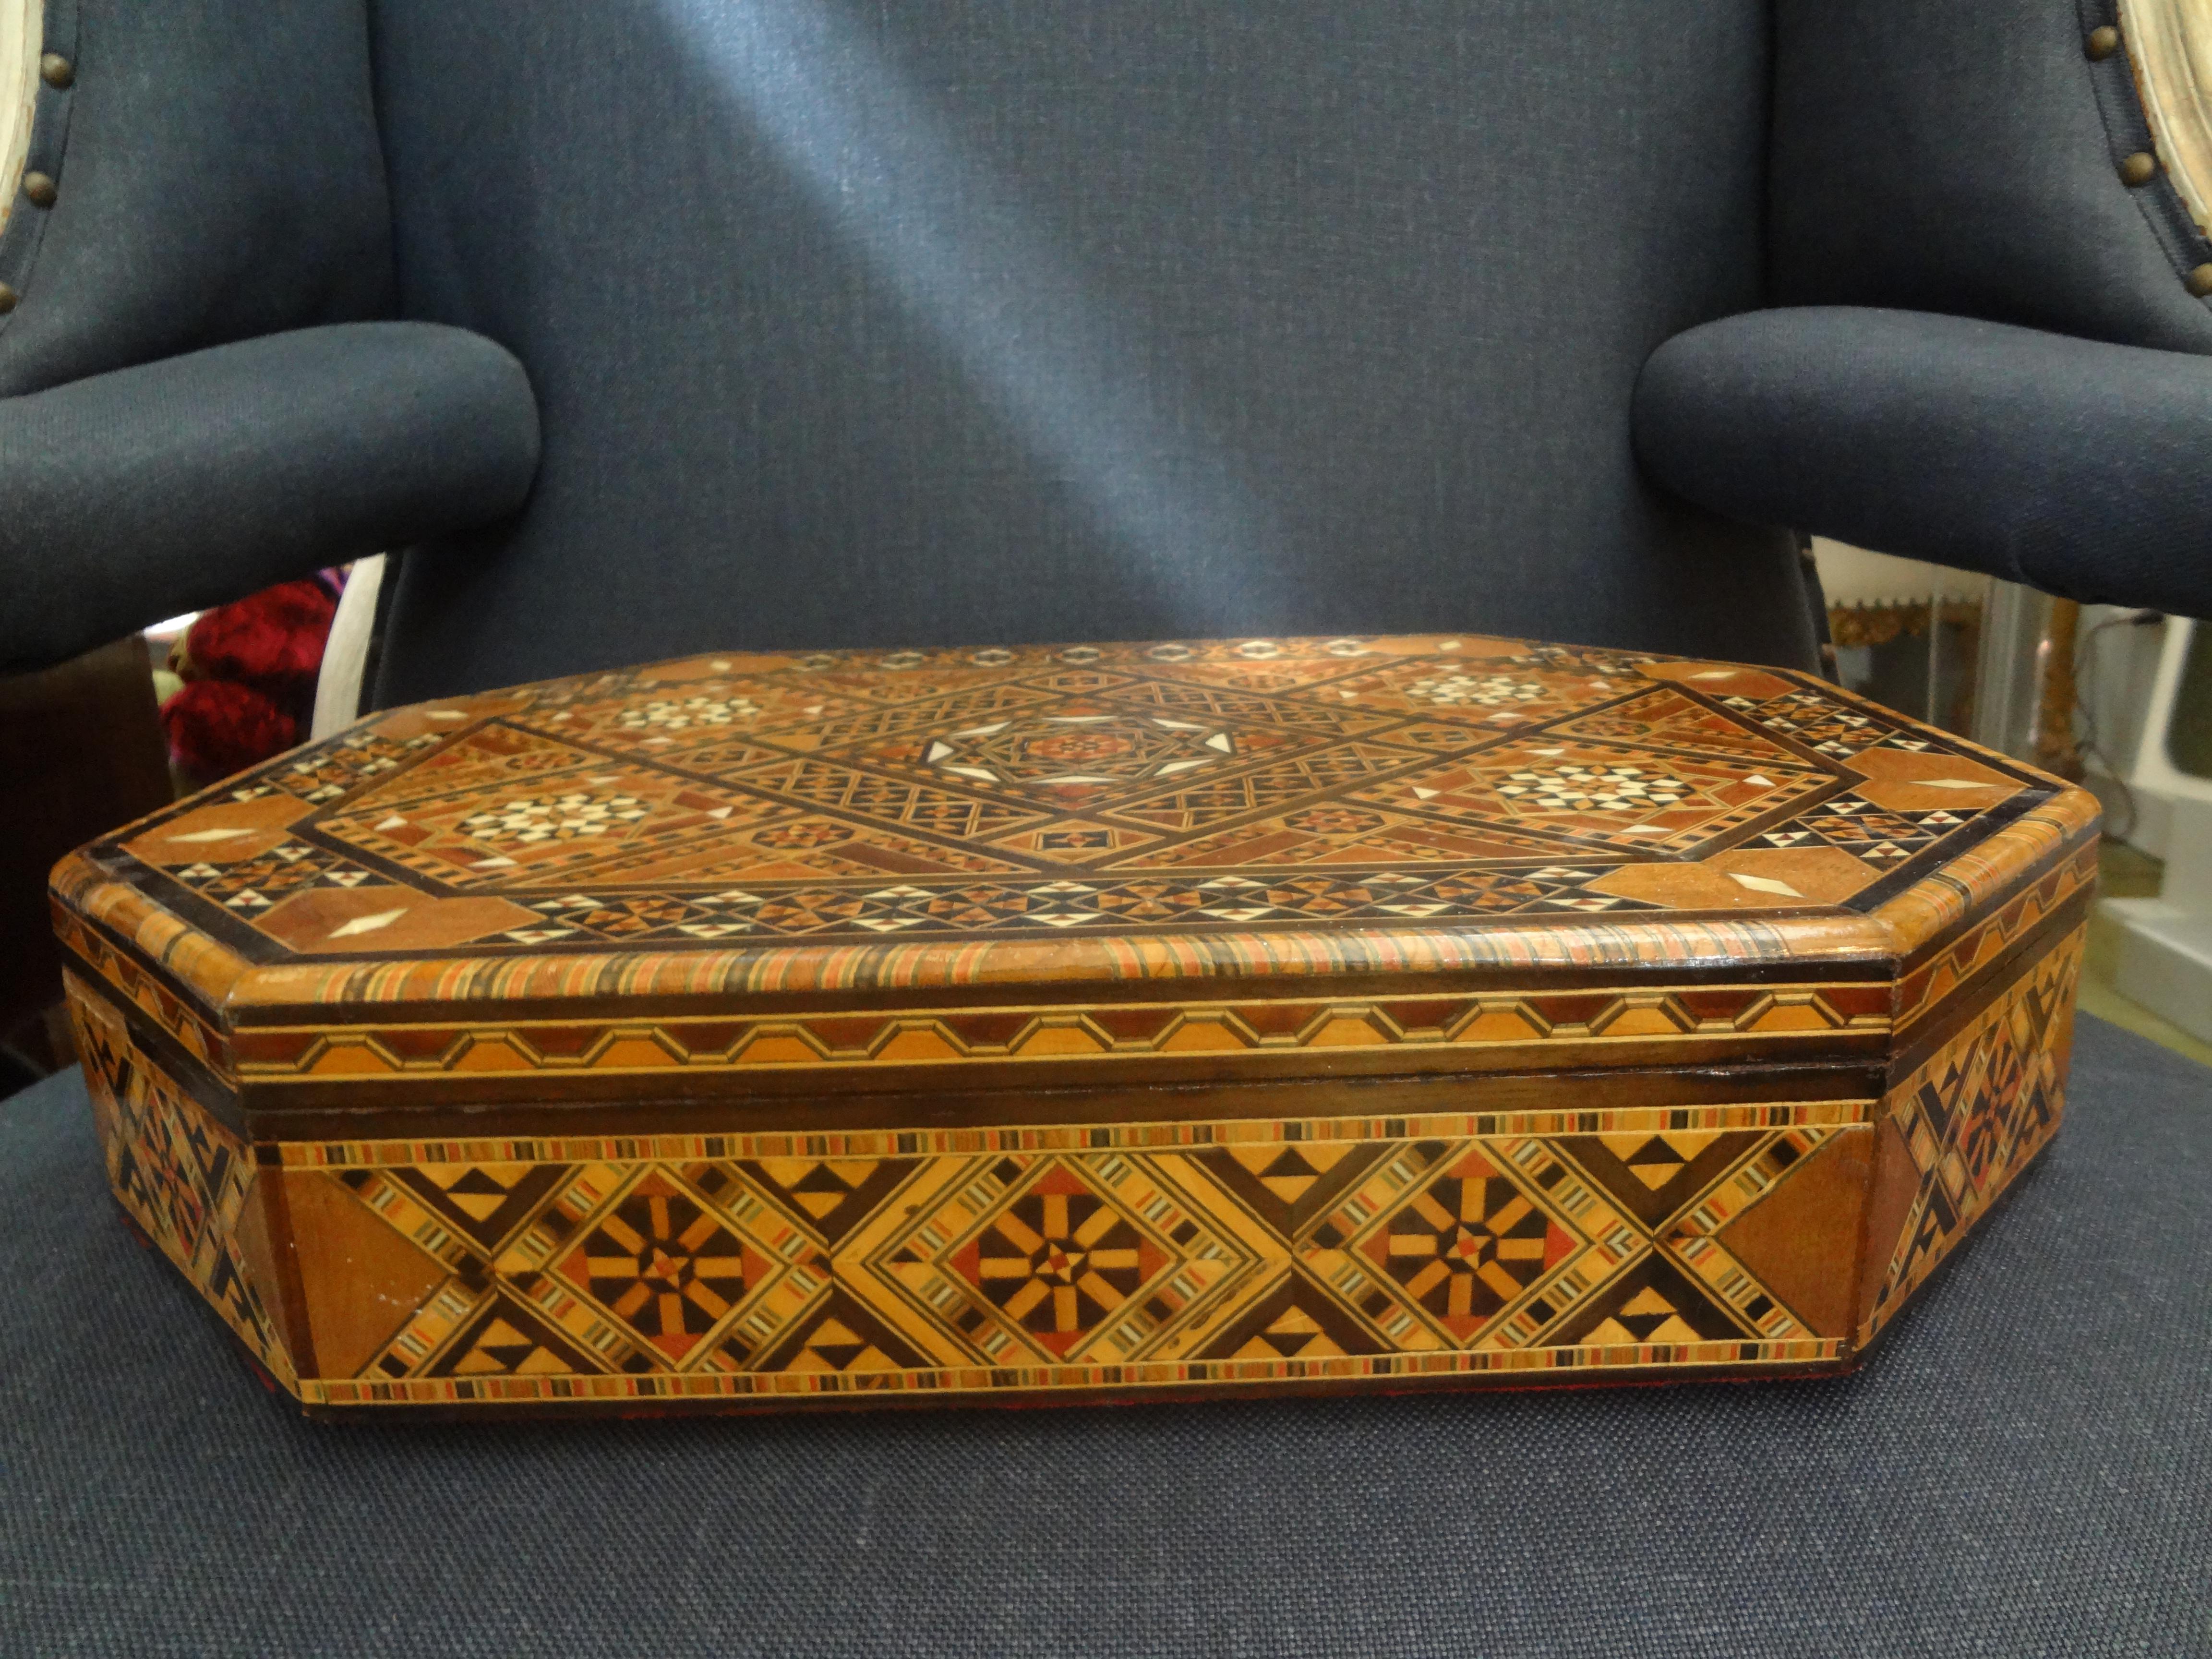 Anglo-Indian Large Moroccan or Middle Eastern Octagonal Box with Inlaid Mother of Pearl